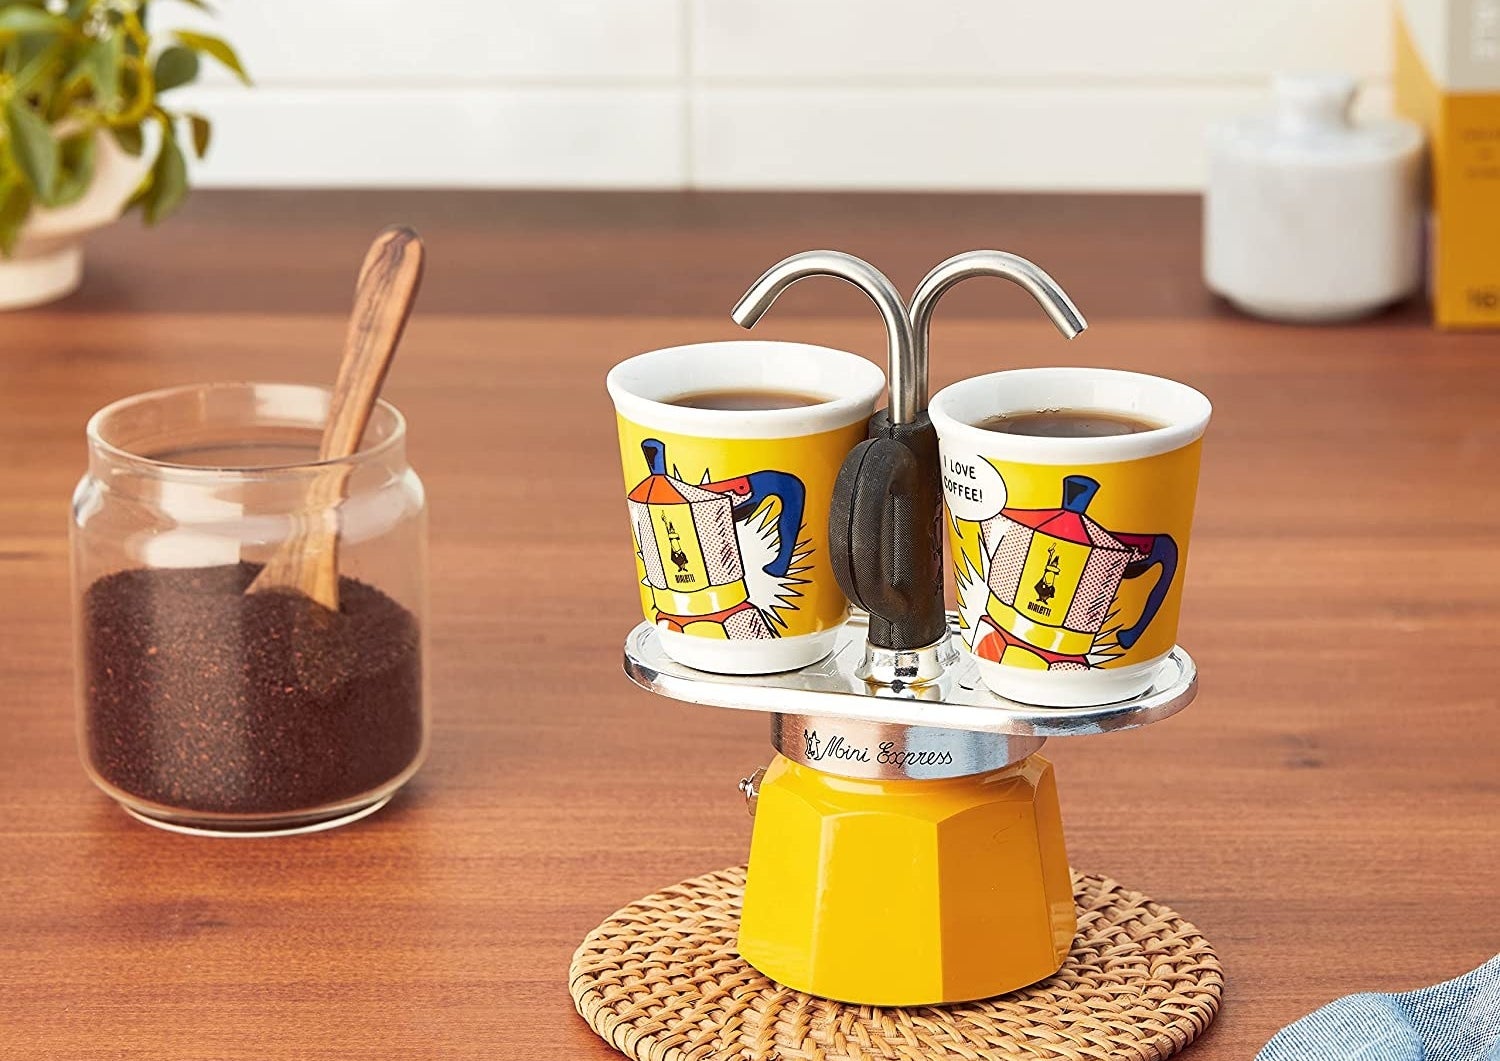 The yellow pot with two espresso cups